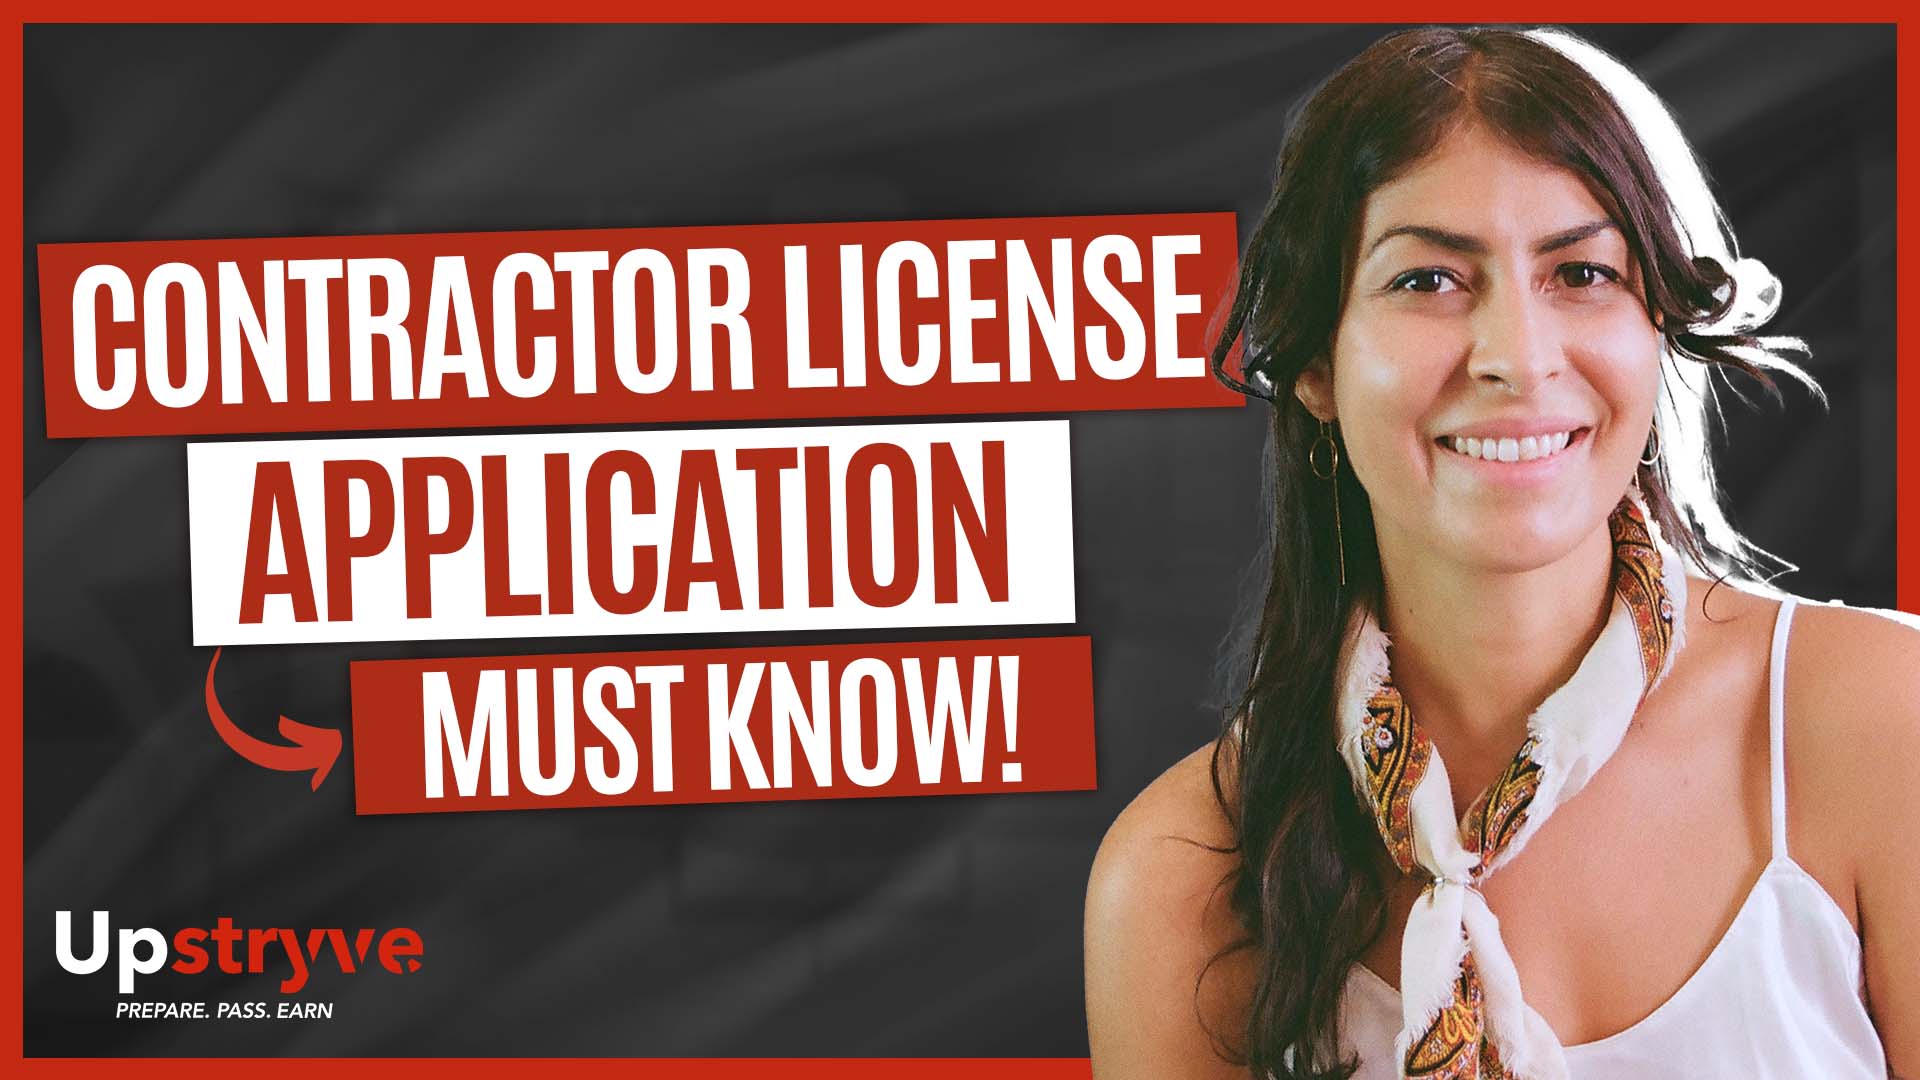 Lauren Ruiz is the Upstryve Director of Applications. She and her team can help you perfectly fill out and deliver your licensing application so that you save time and money through this difficult process. In today's video, she goes over how you can still qualify to obtain your General Contractor's license even if you have a criminal background. If you need help with your licensing application feel free to email her at Lauren@upstryve.com.